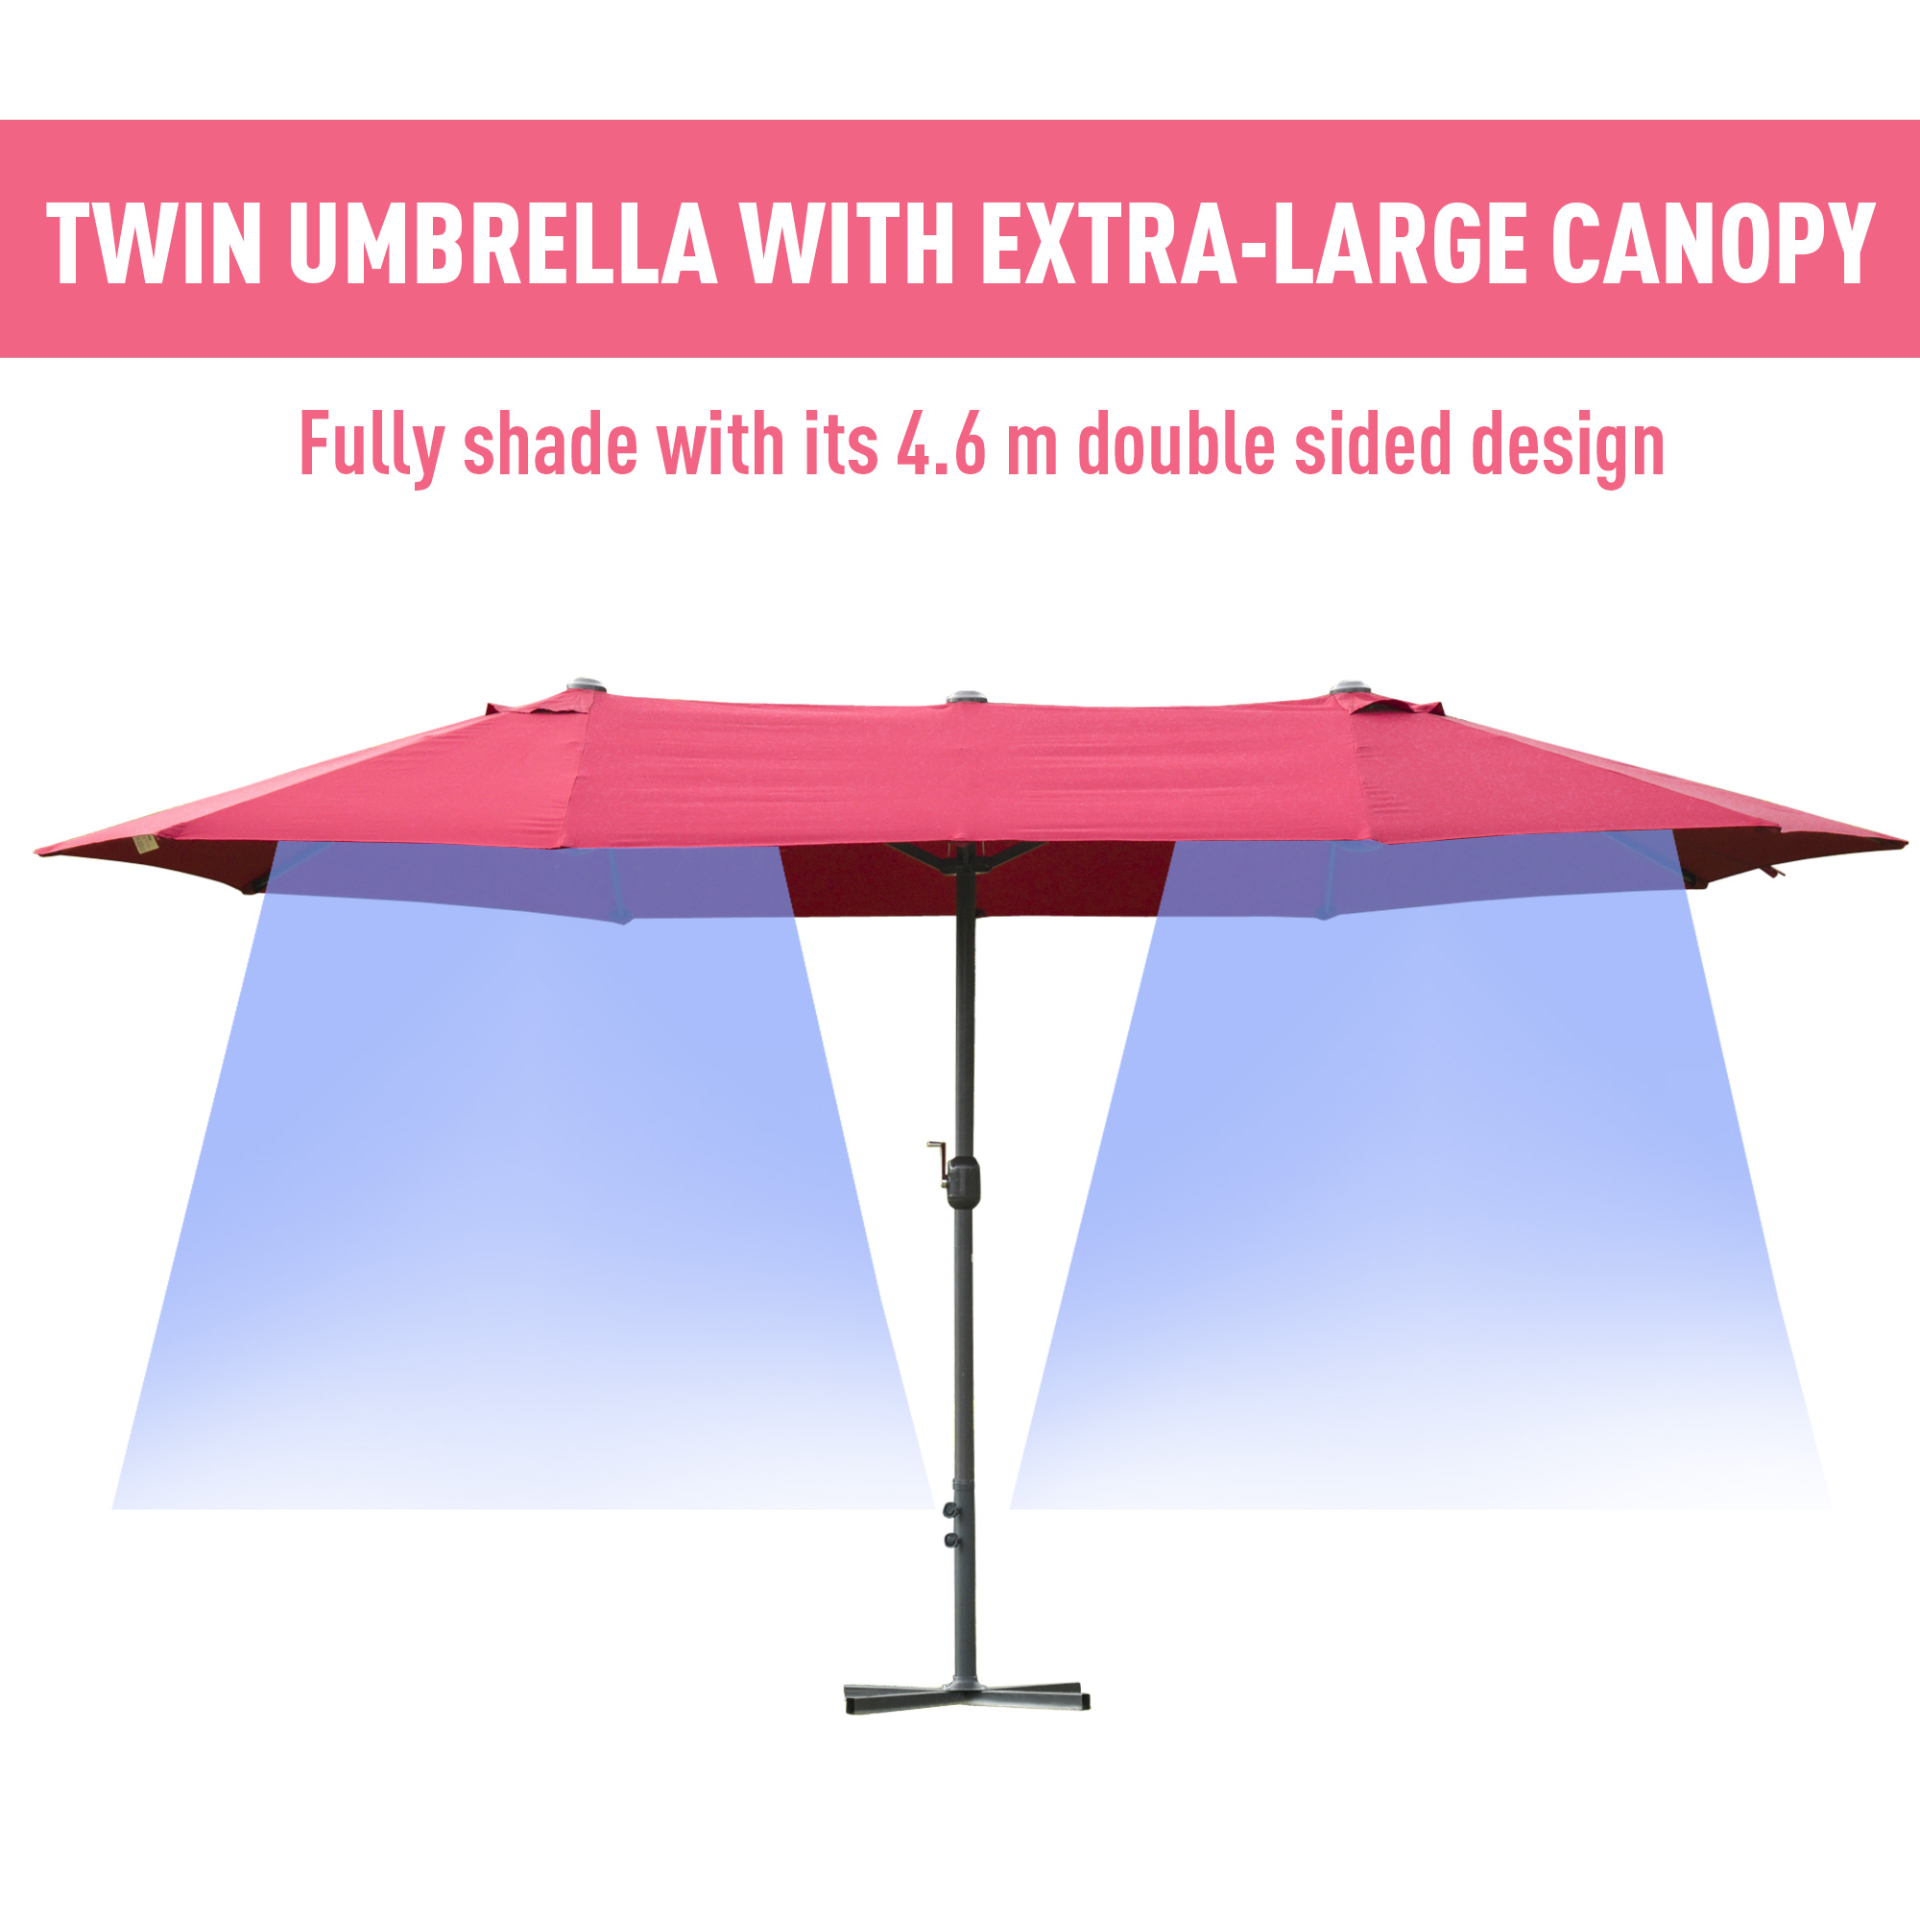 Outsunny 4.6m Garden Parasol Double-Sided Sun Umbrella Patio Market Shelter Canopy Shade Outdoor with Cross Base – Red